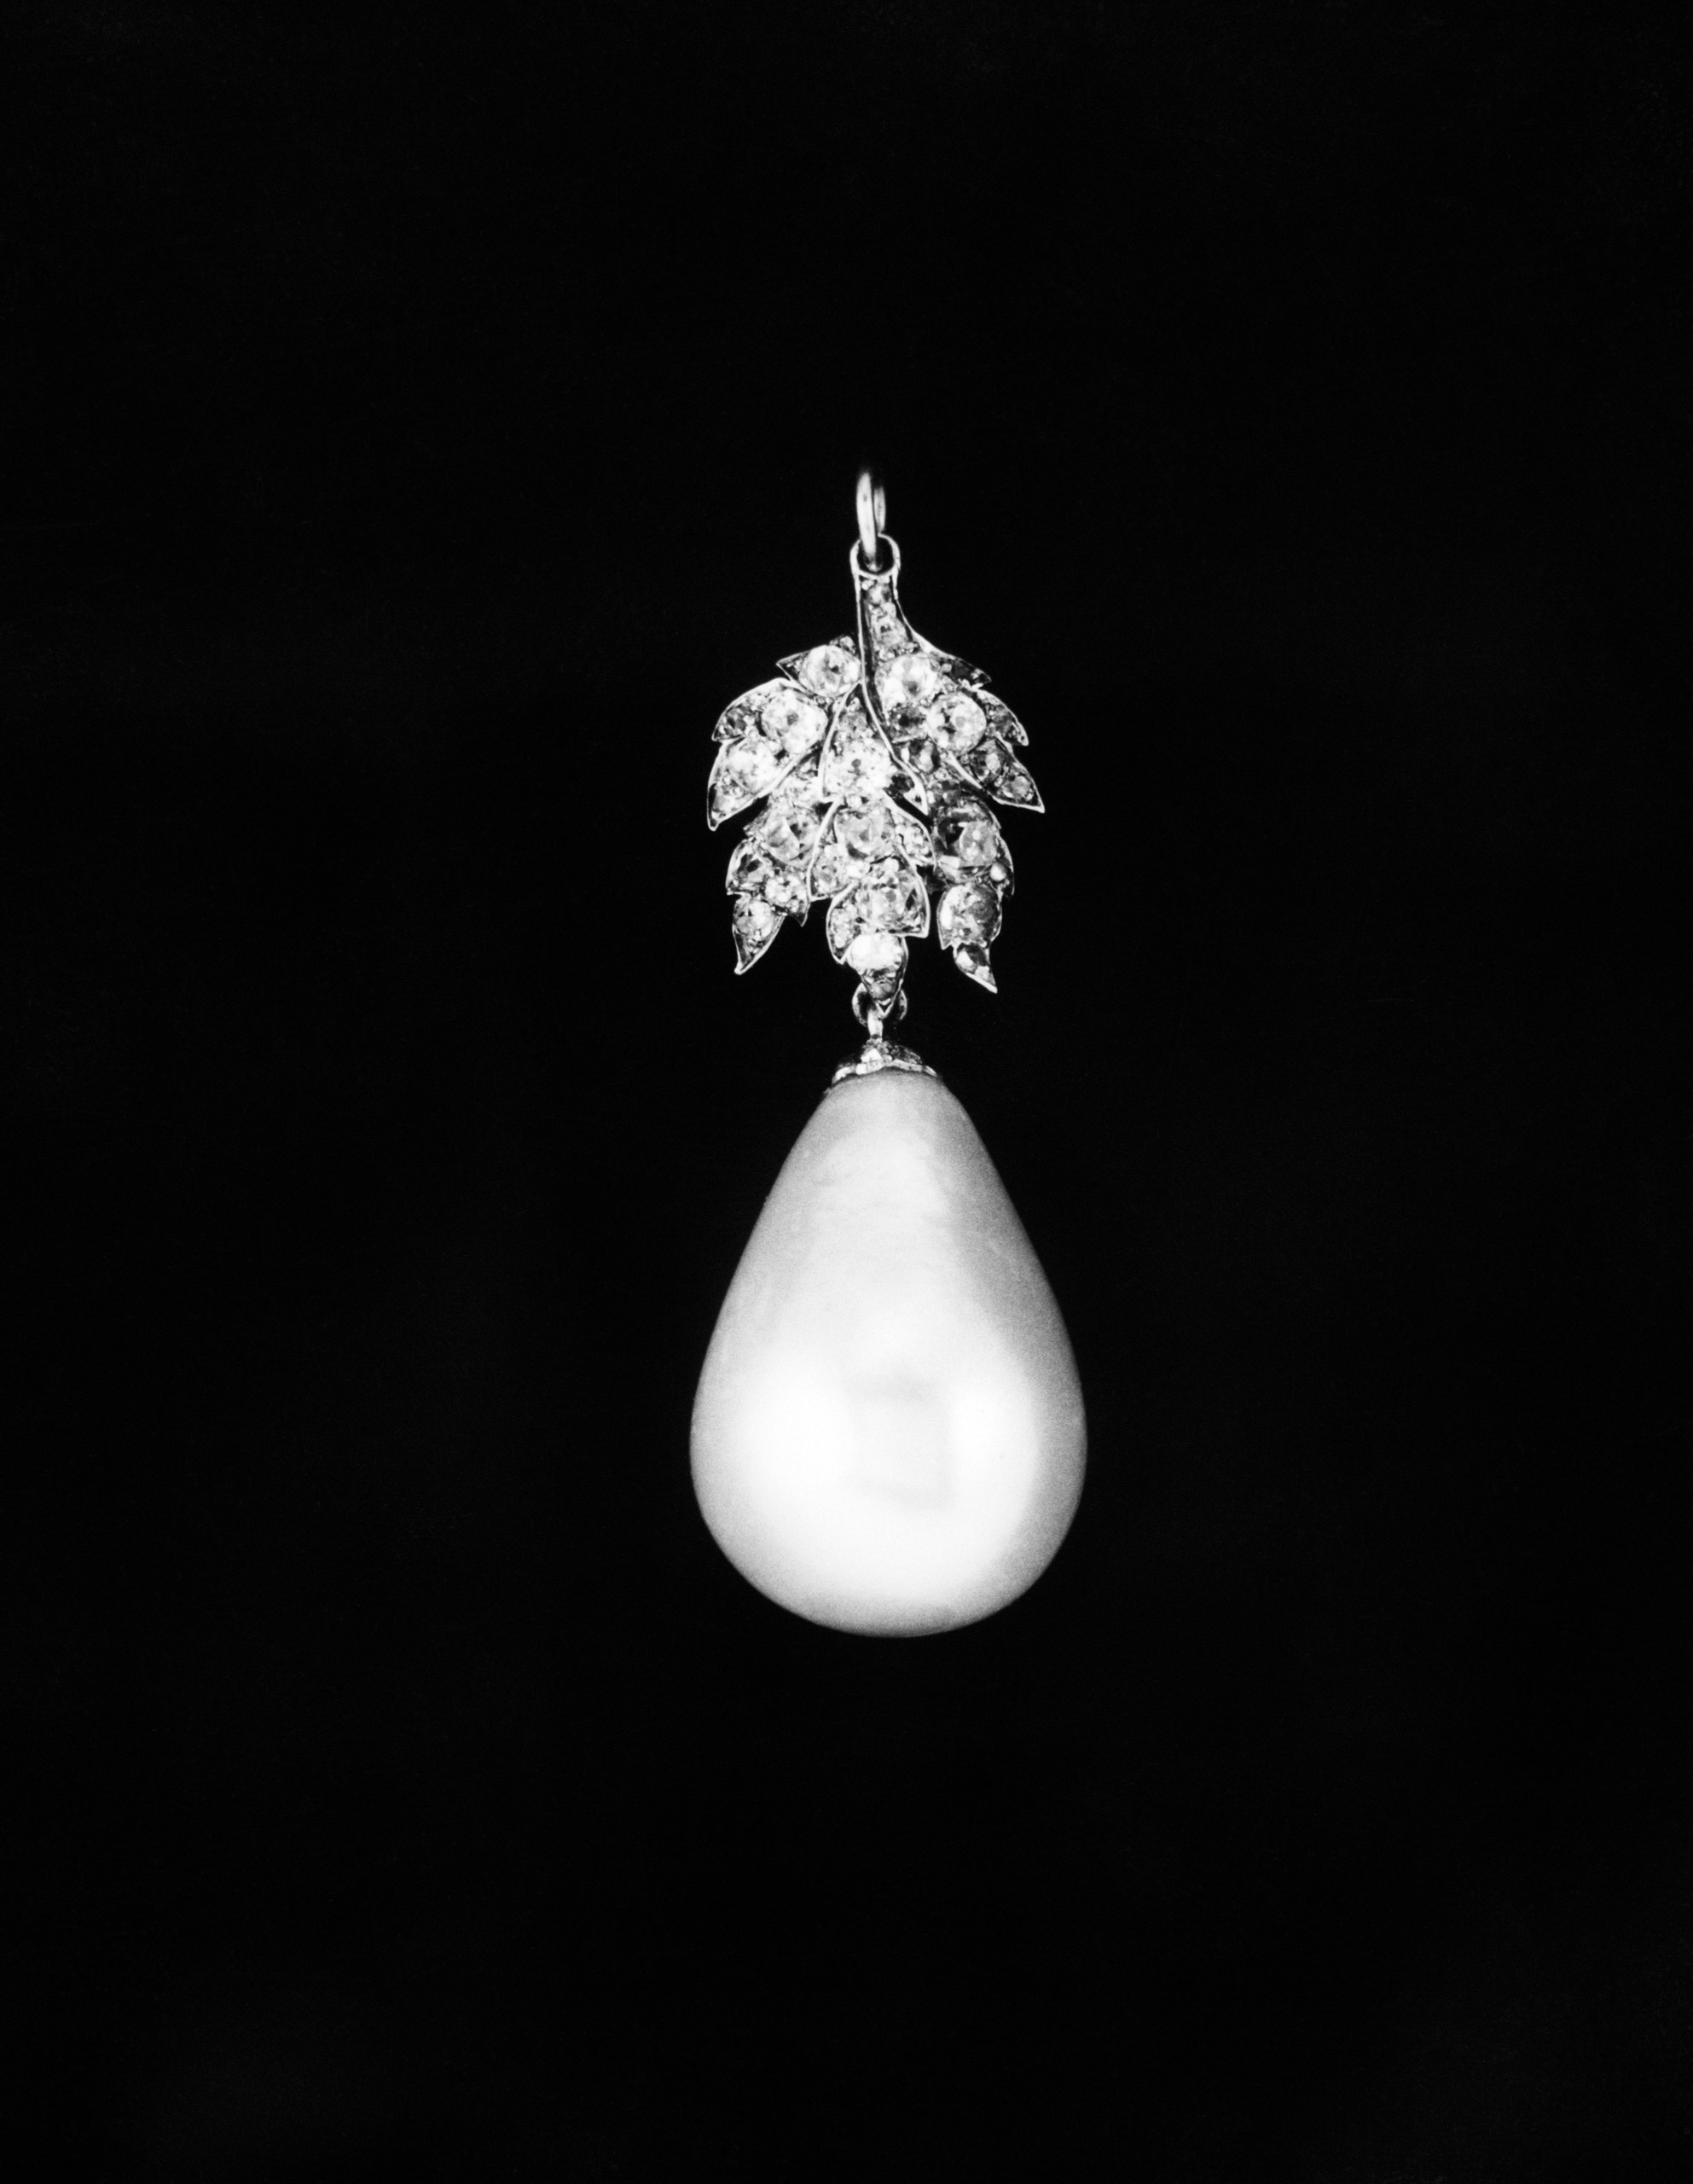 The famous tear drop shaped pearl, known as La Peregrina, weighing 203.84 grams.